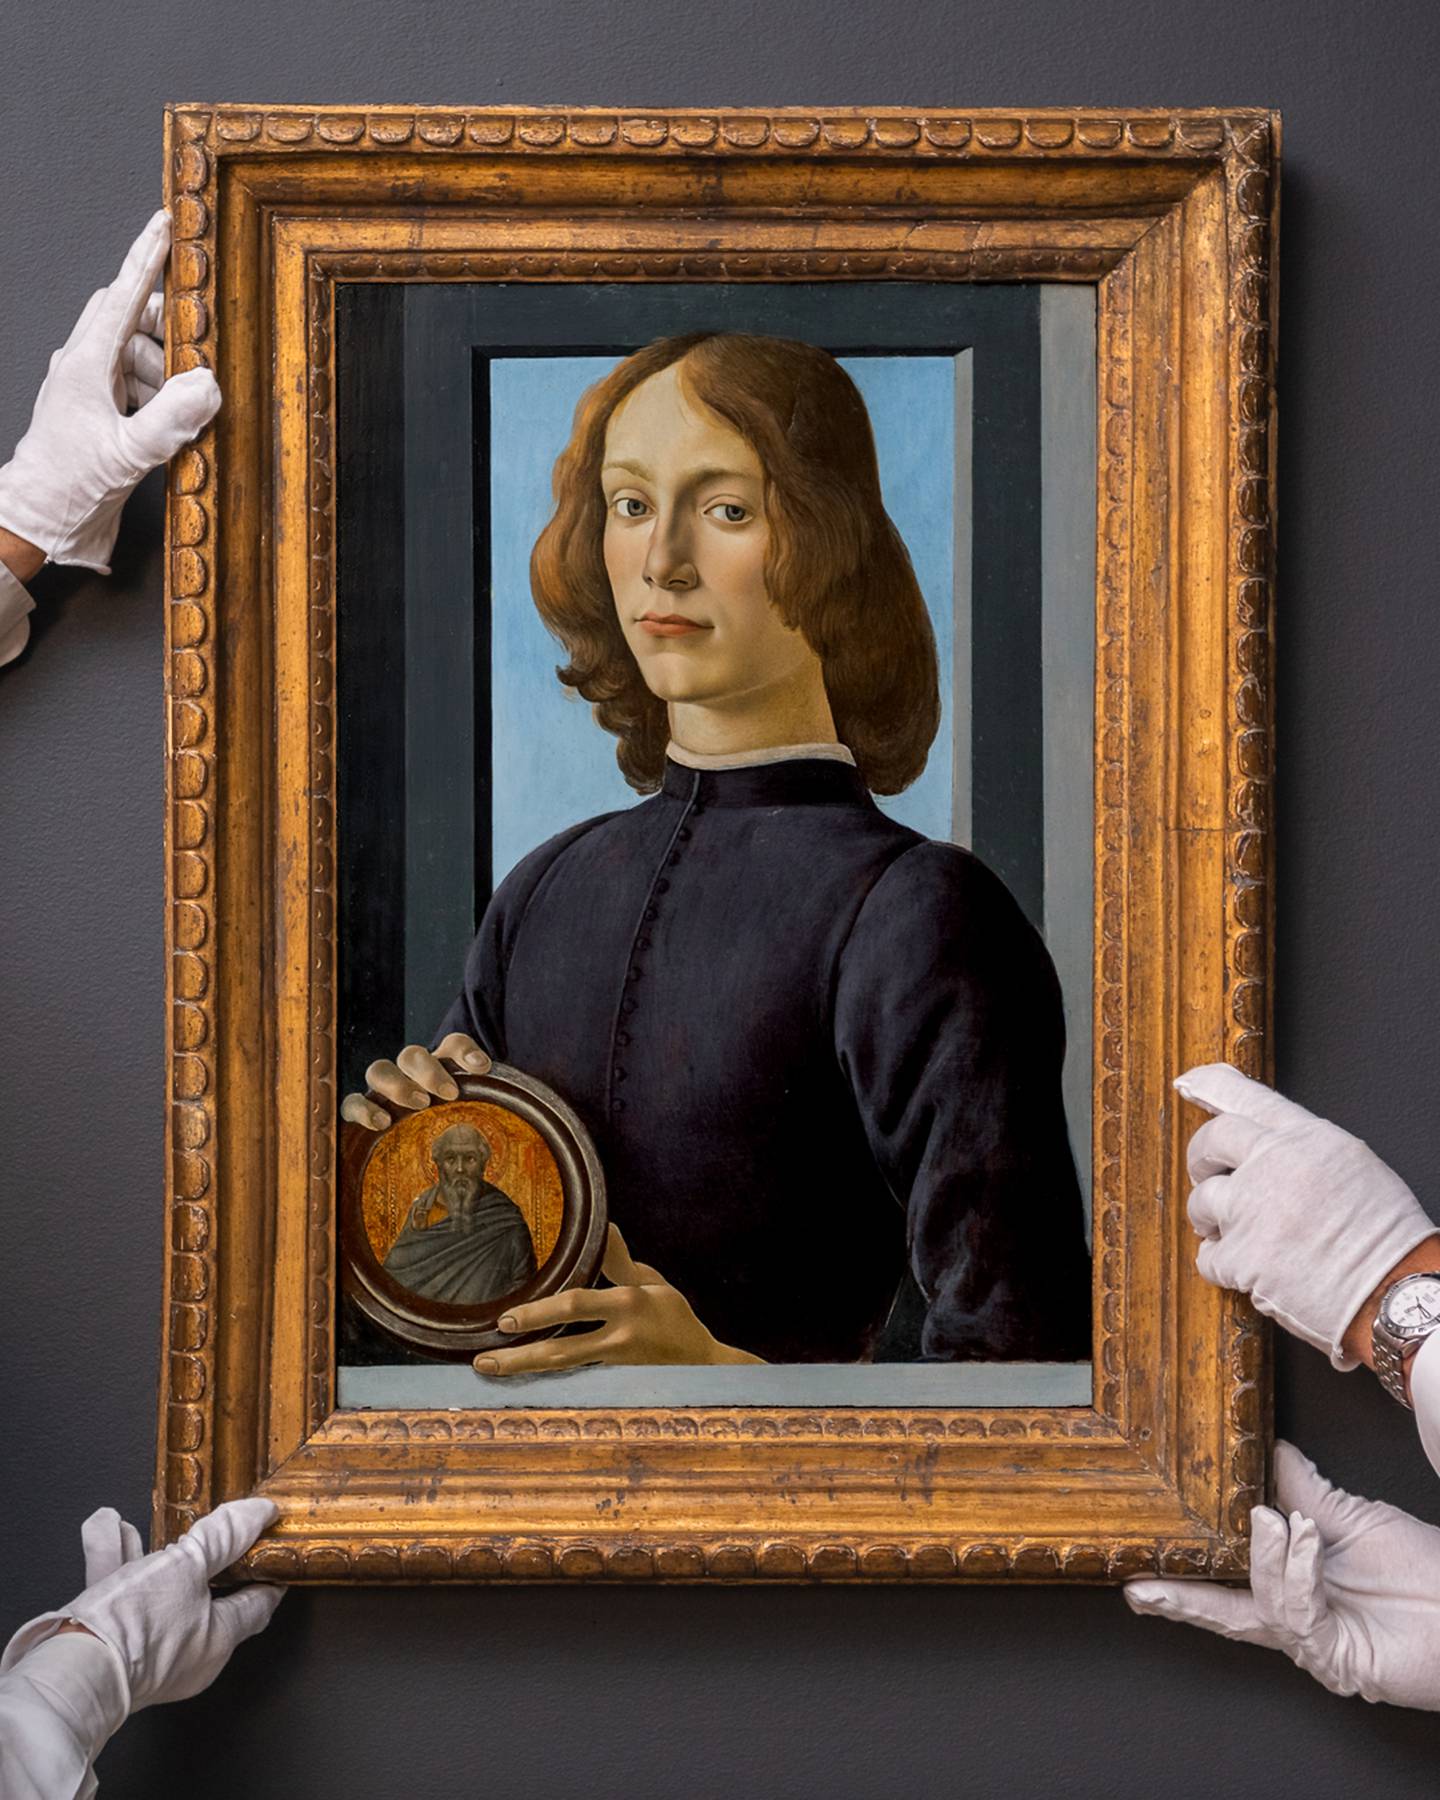 Extremely rare to market, Sandro Botticelli's 'Portrait of a Young Man Holding a Roundel' sold at the price of $92.2 million in January 2021. Photo: Sotheby's